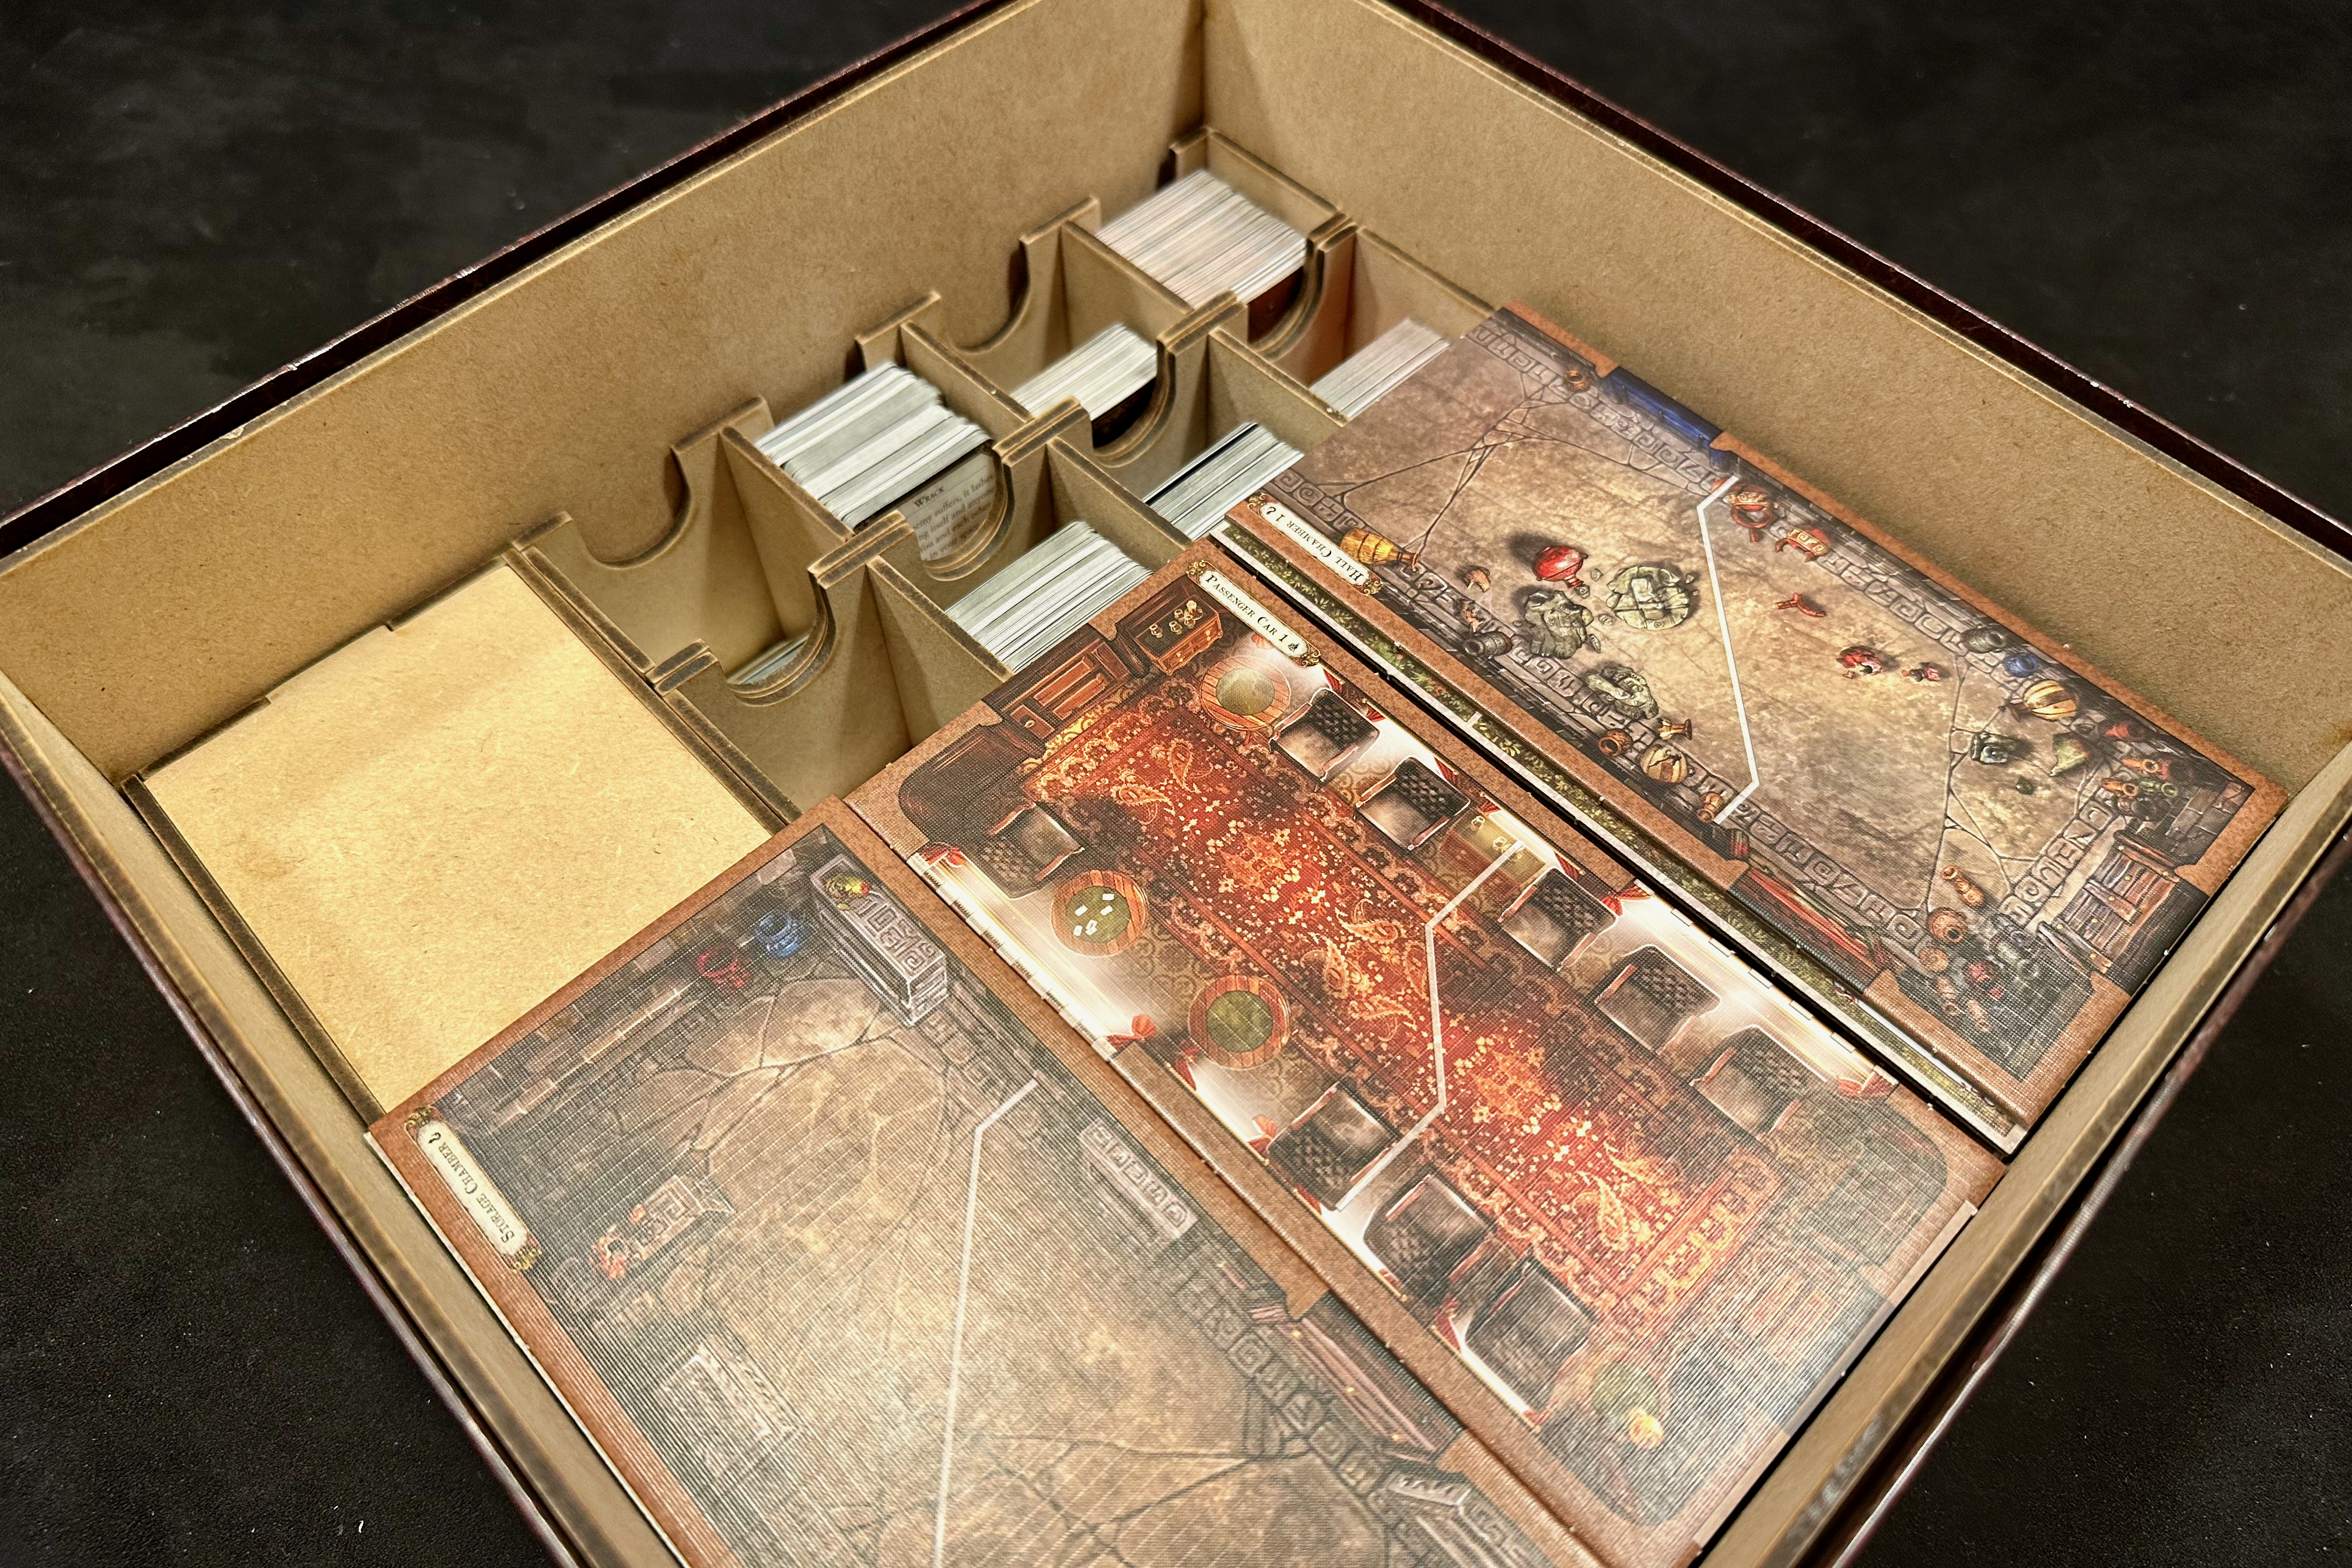 Game box filled with tiles and completed organisers